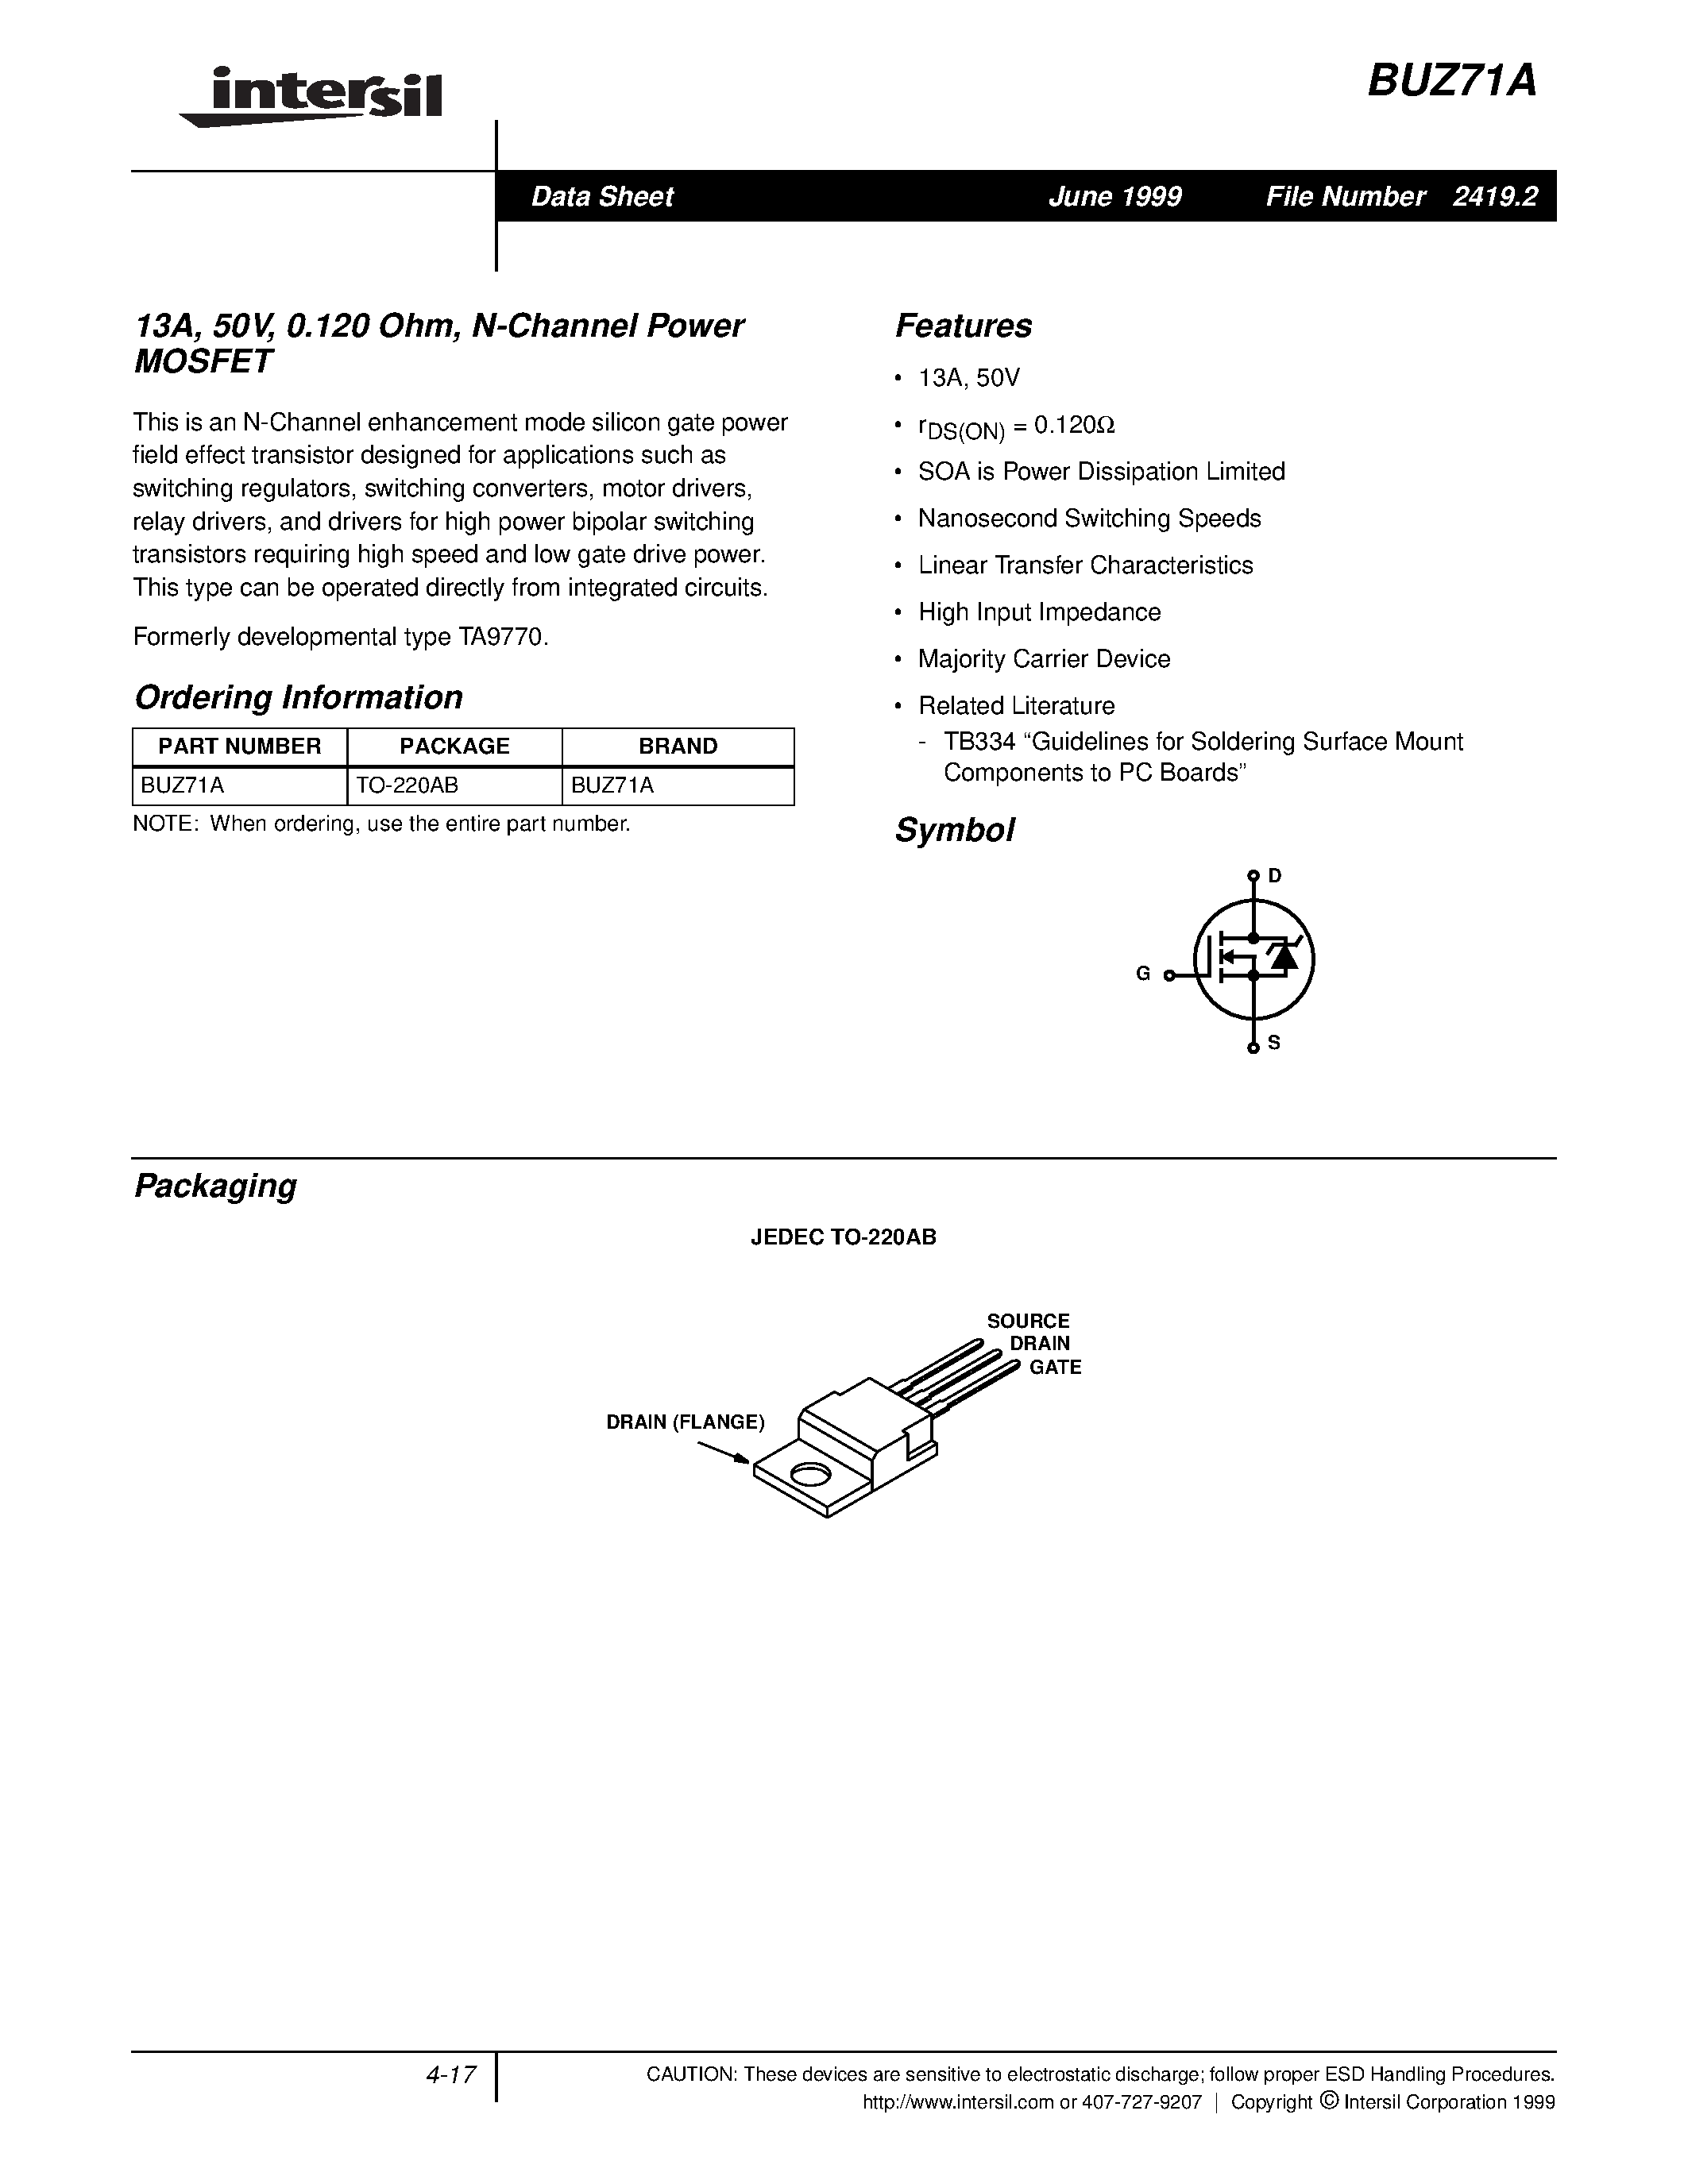 Datasheet BUZ71A - 13A/ 50V/ 0.120 Ohm/ N-Channel Power MOSFET page 1